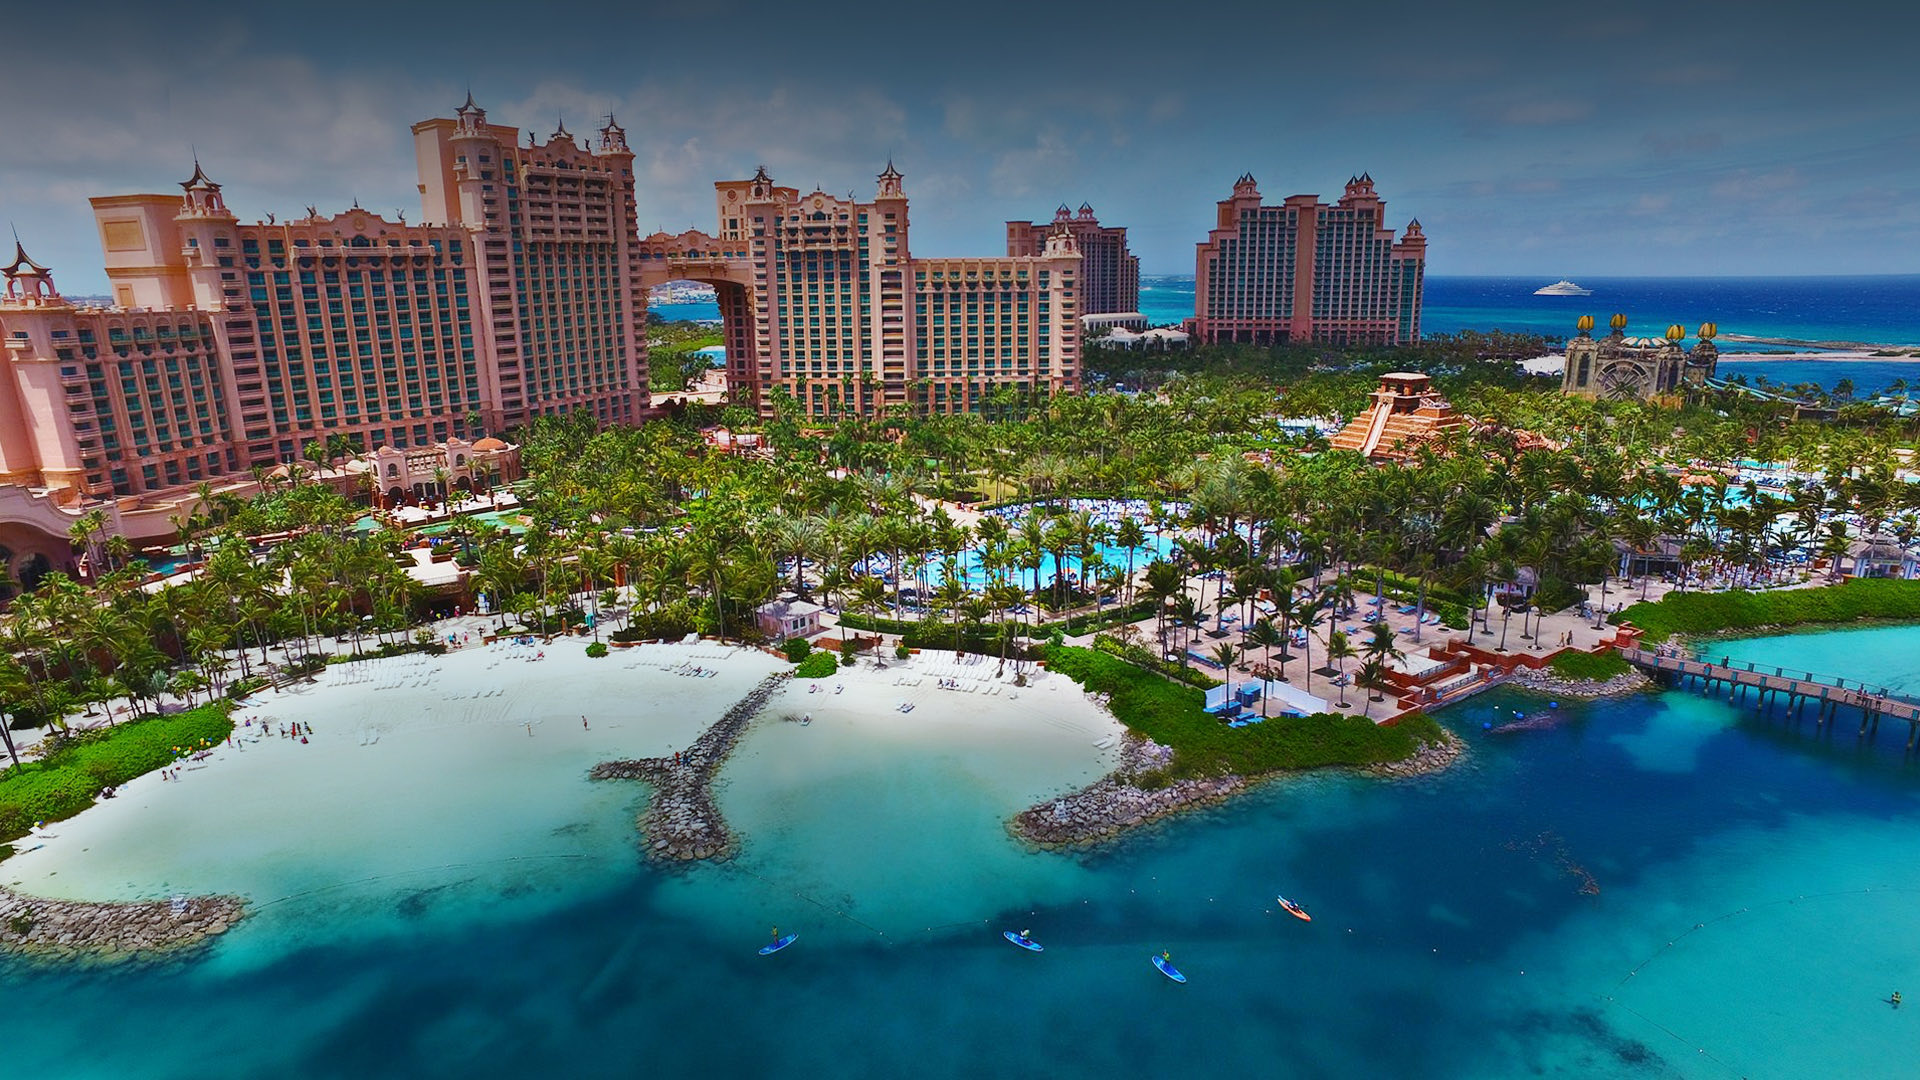 Atlantis Paradise Island: Relaxation, Fun and Excitement in the Bahamas!